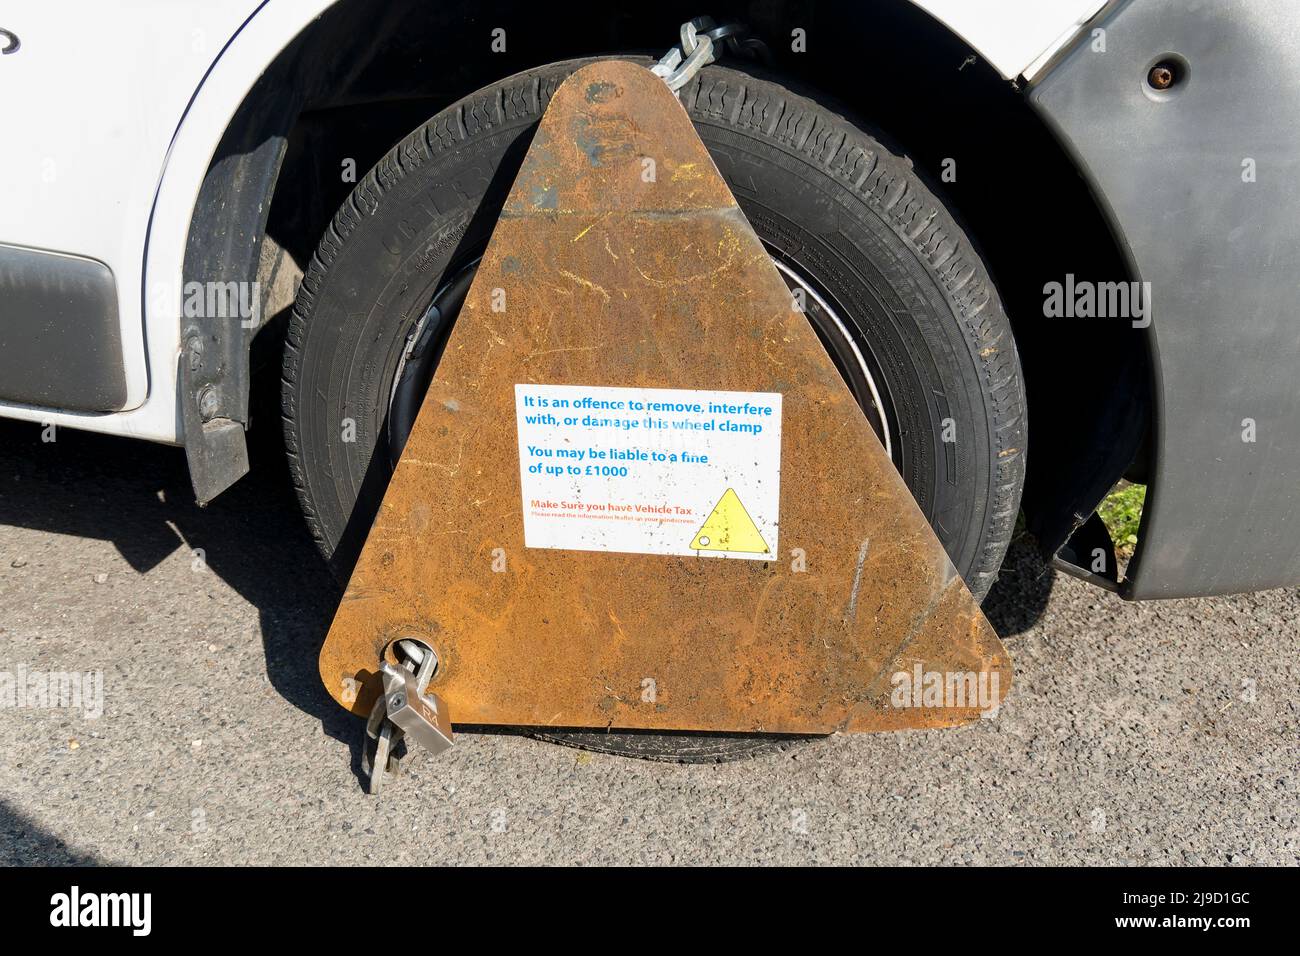 Warminster, Wiltshire, UK - May 17 2022: A wheel clamp on an untaxed vehicle Stock Photo